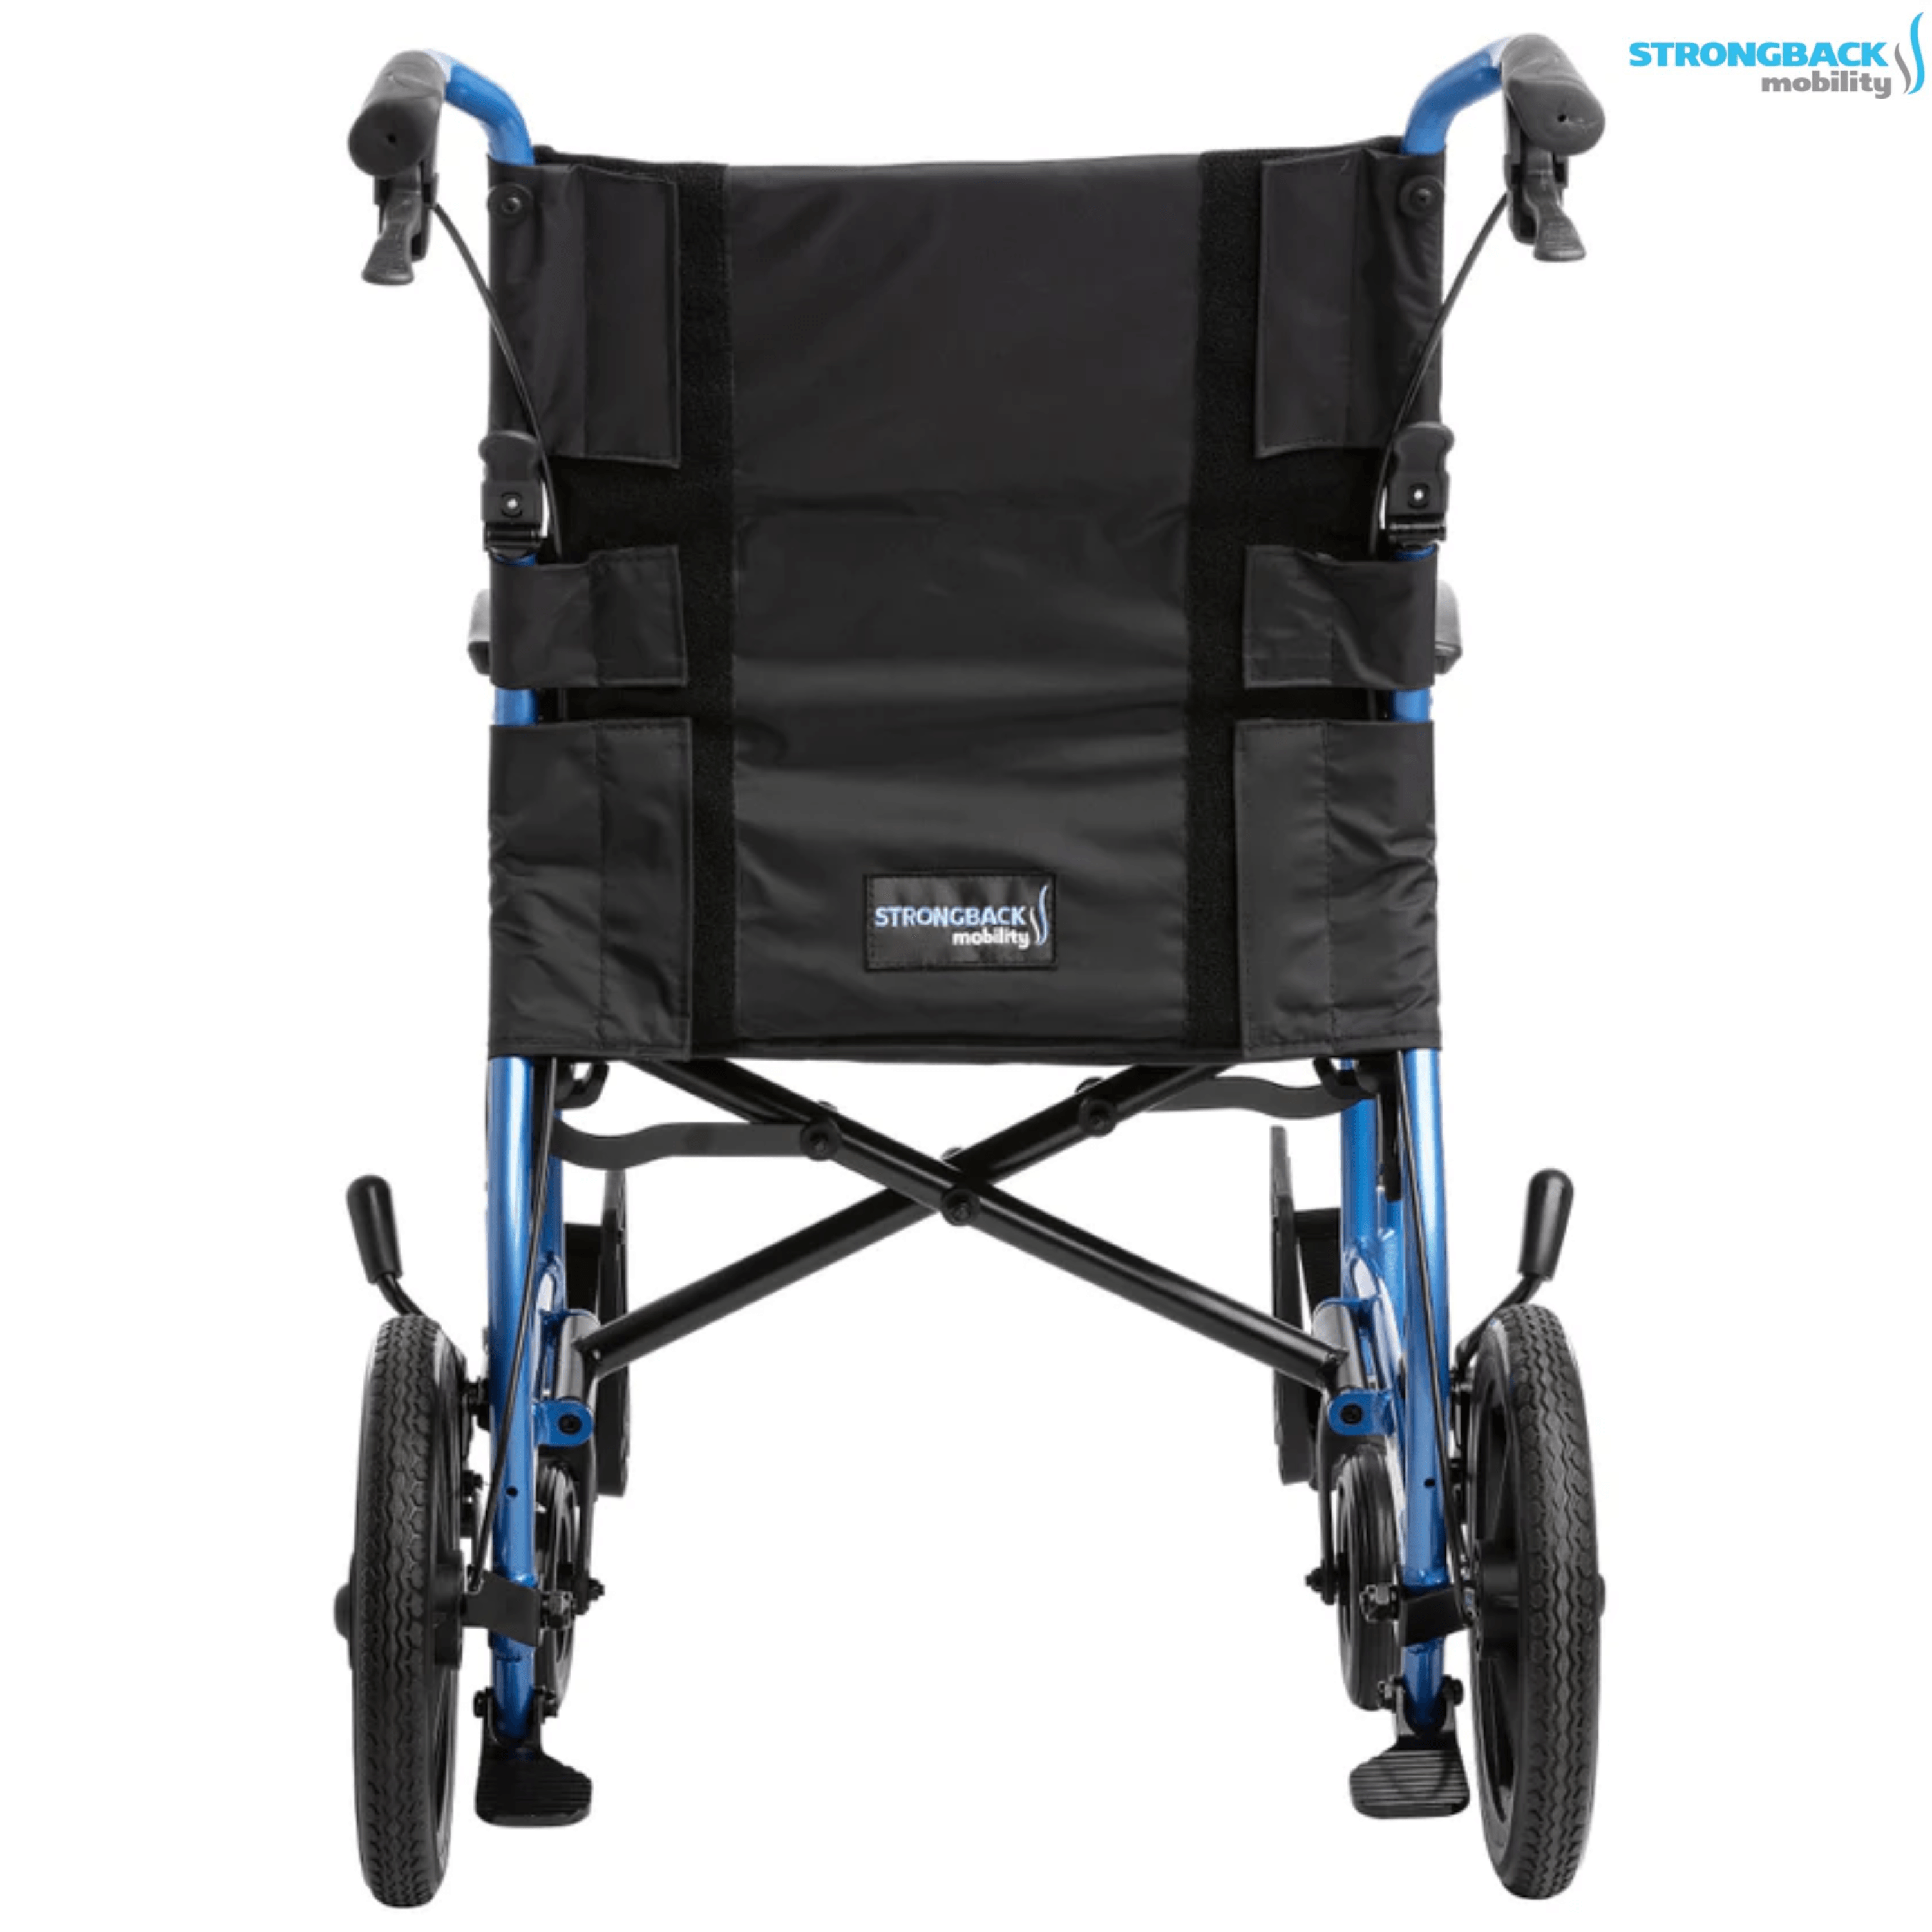 STRONGBACK 12S+AB Transport Wheelchair Comfortable and Stylish Strongback